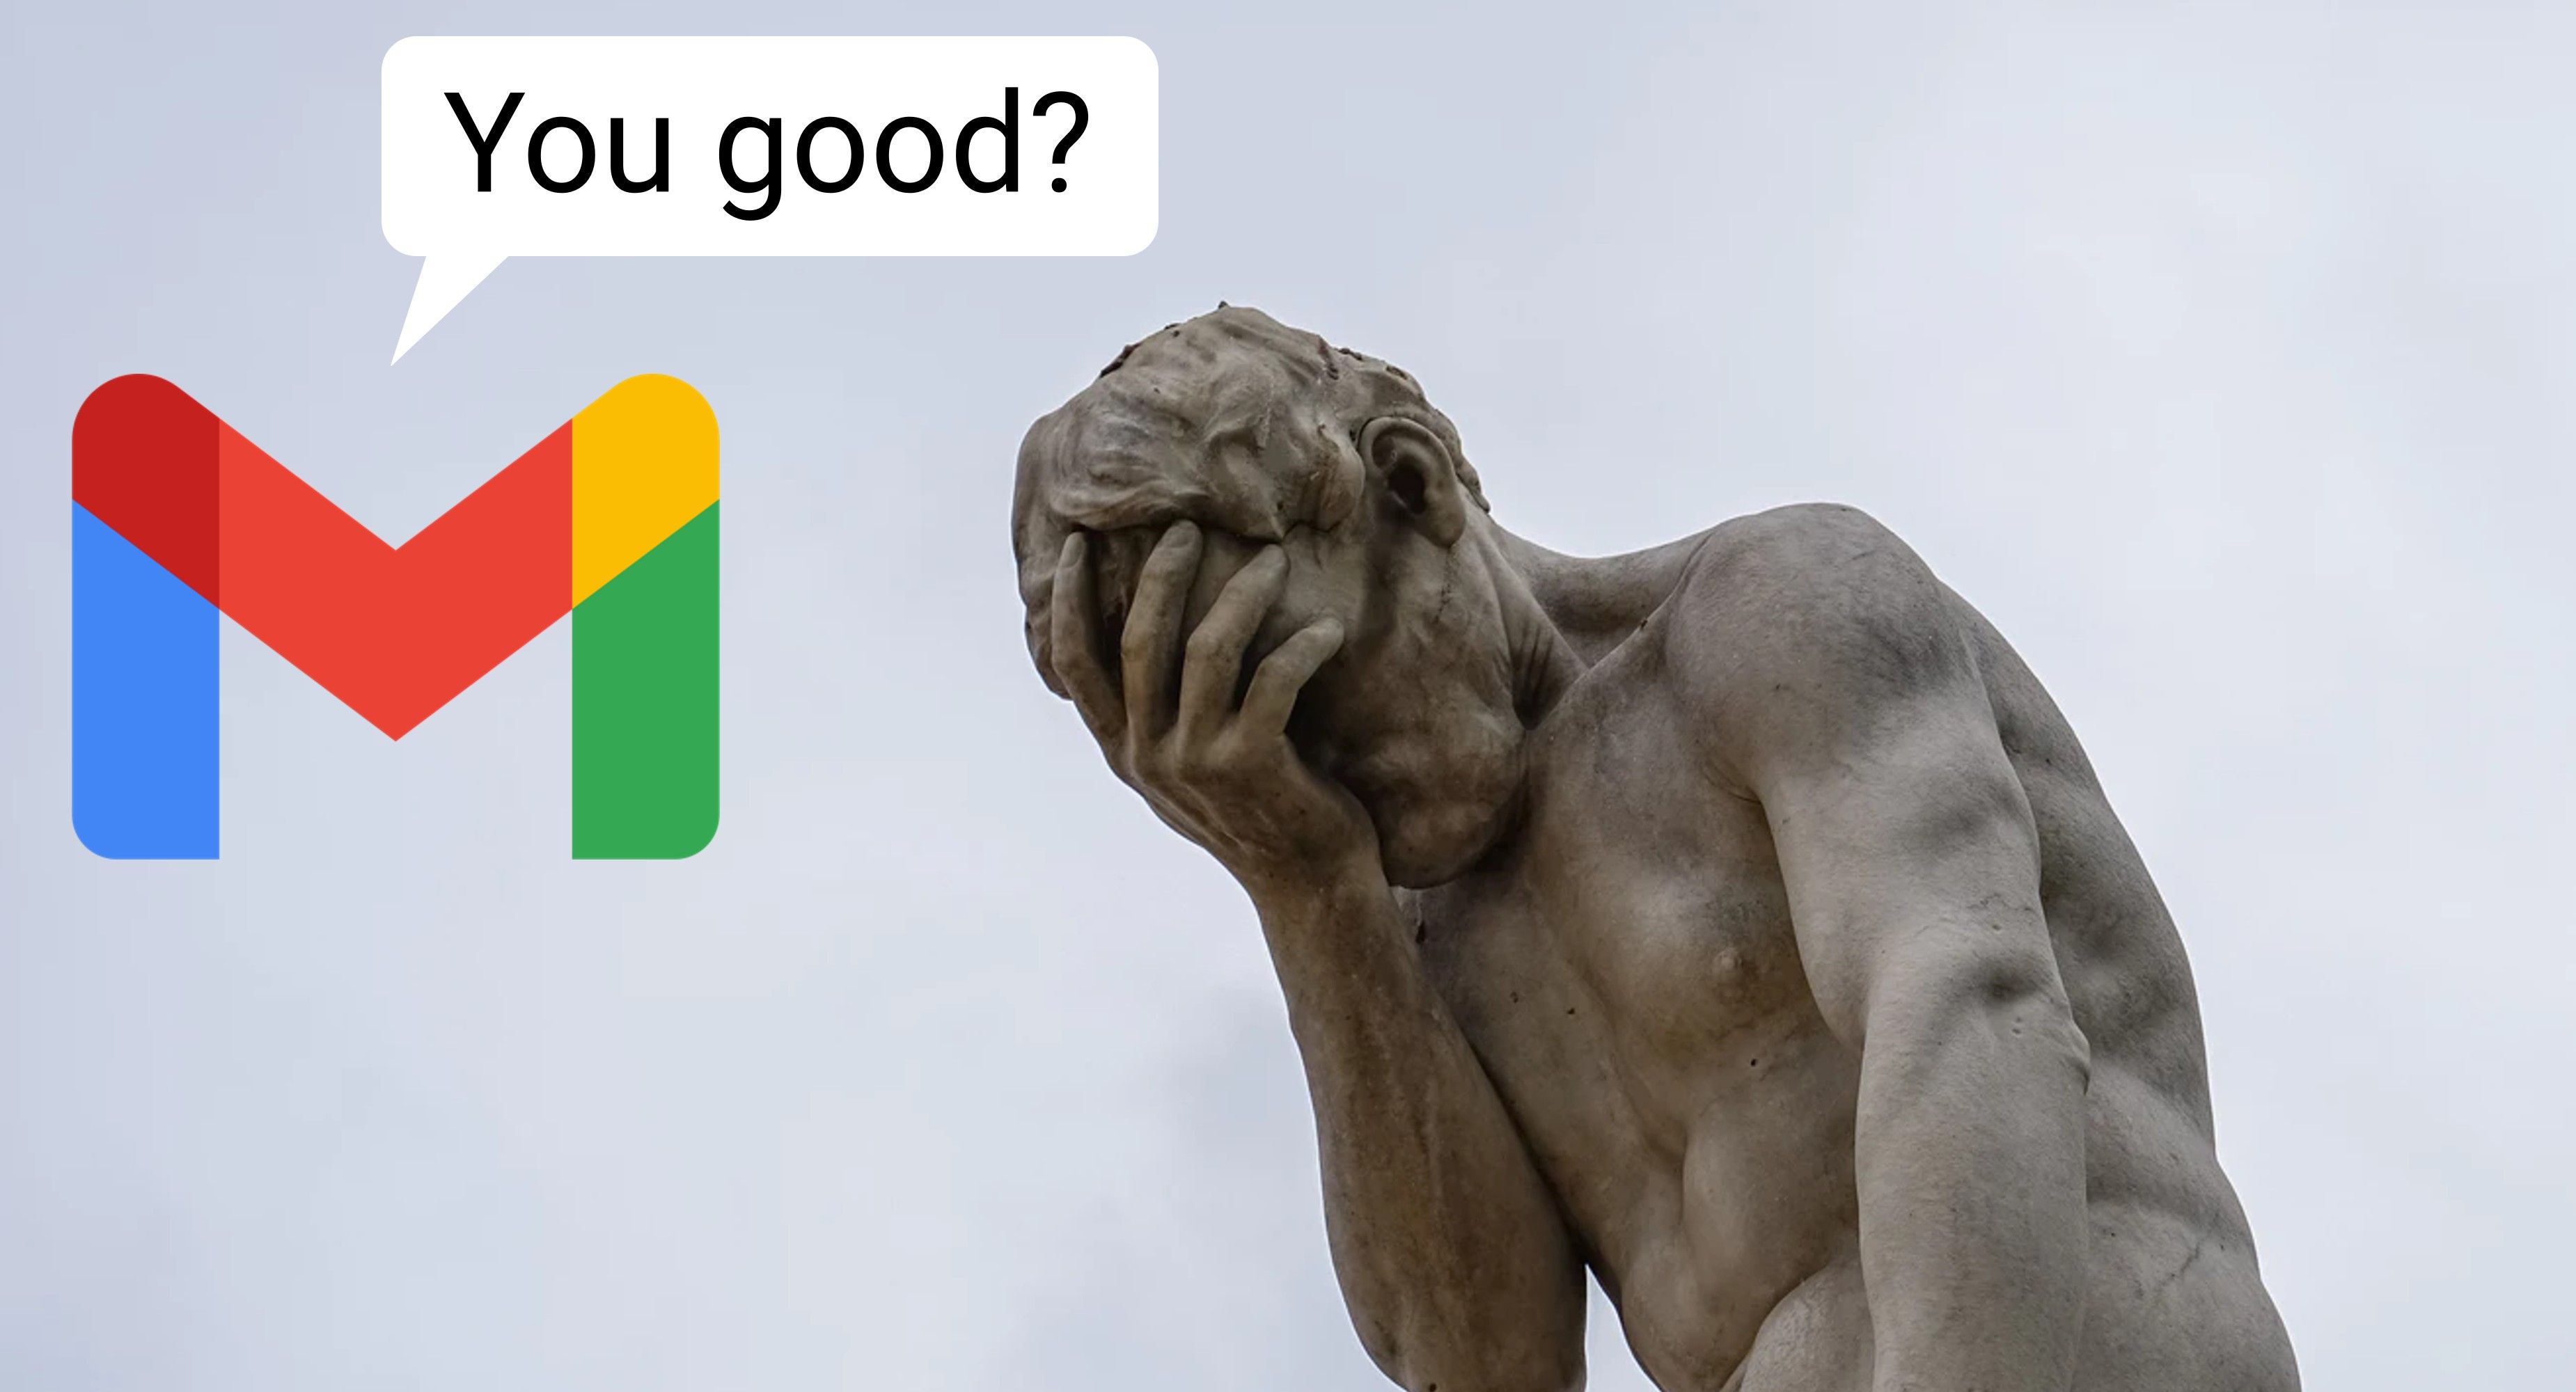 A statue in dispair with the gmail logo asking the statue if it's alright